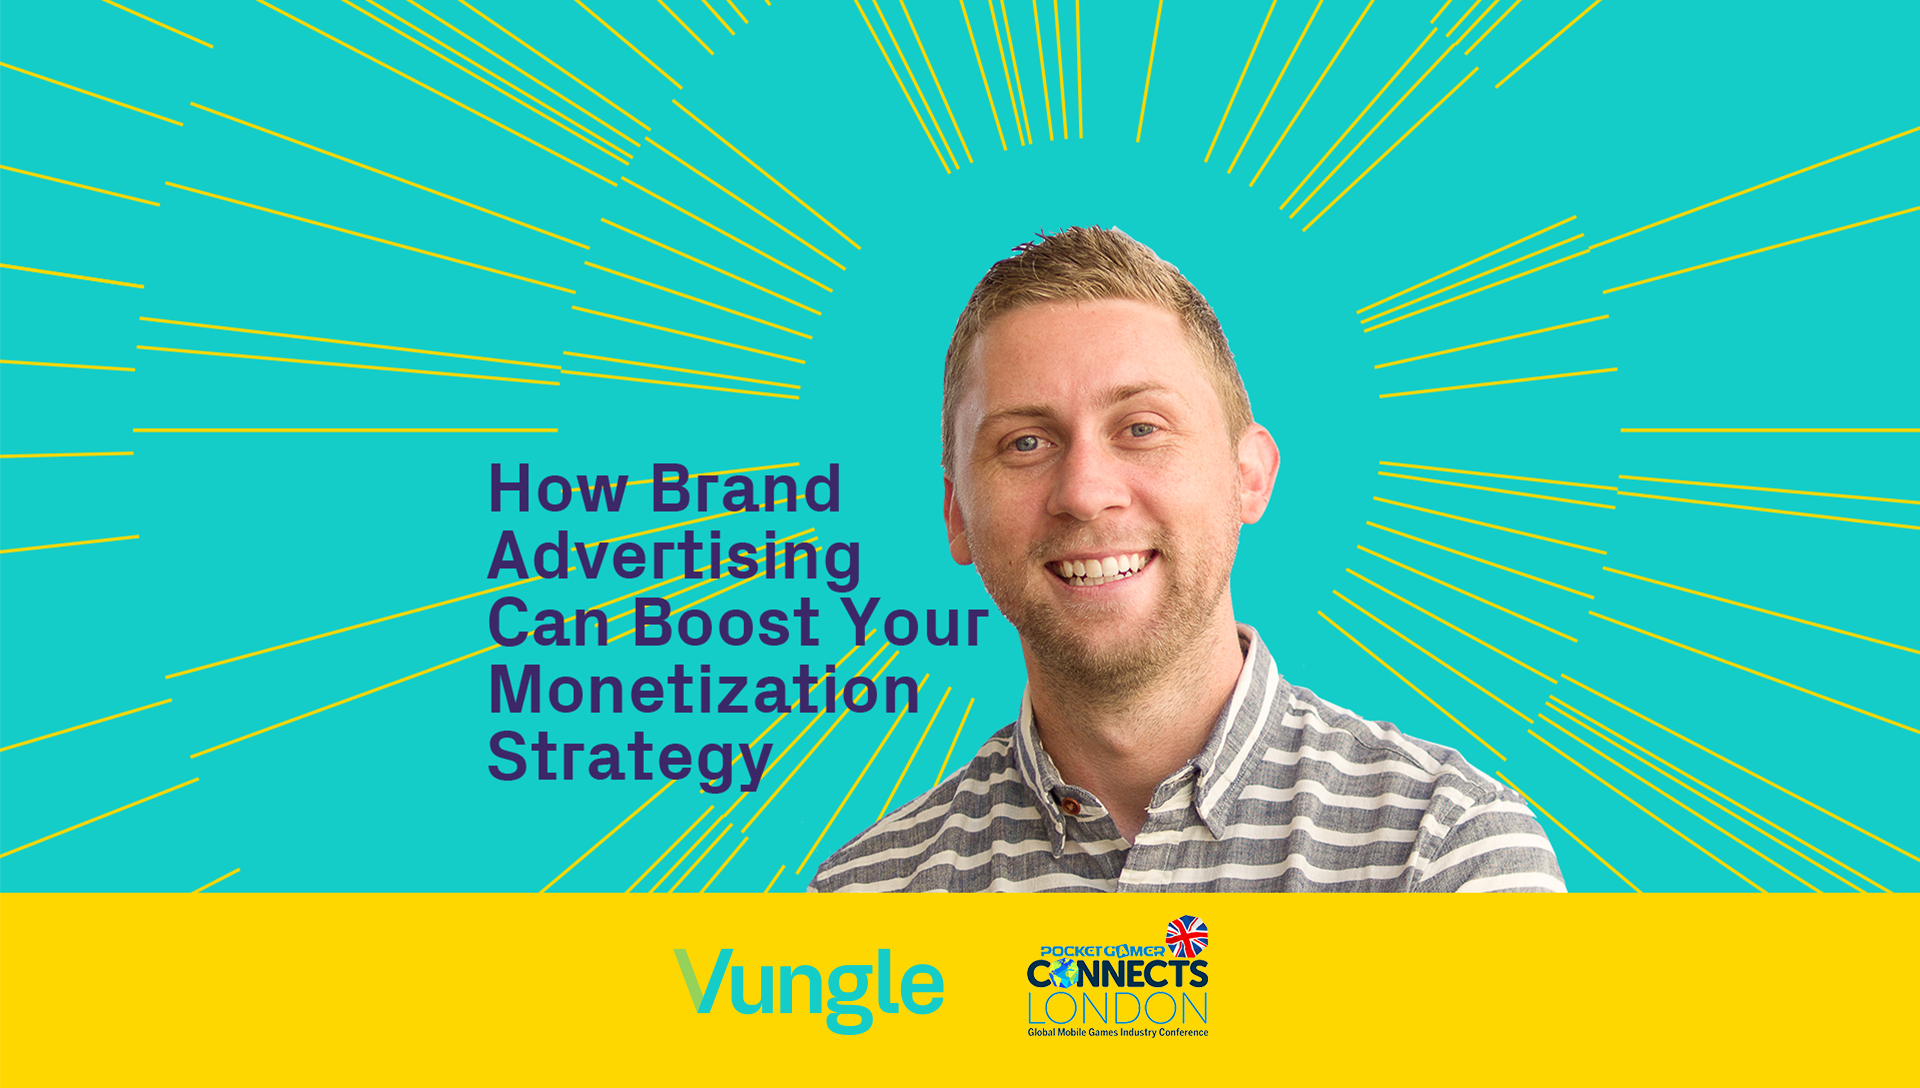 Learn How Brand Advertising Can Boost Your Monetization Strategy at PG Connects London